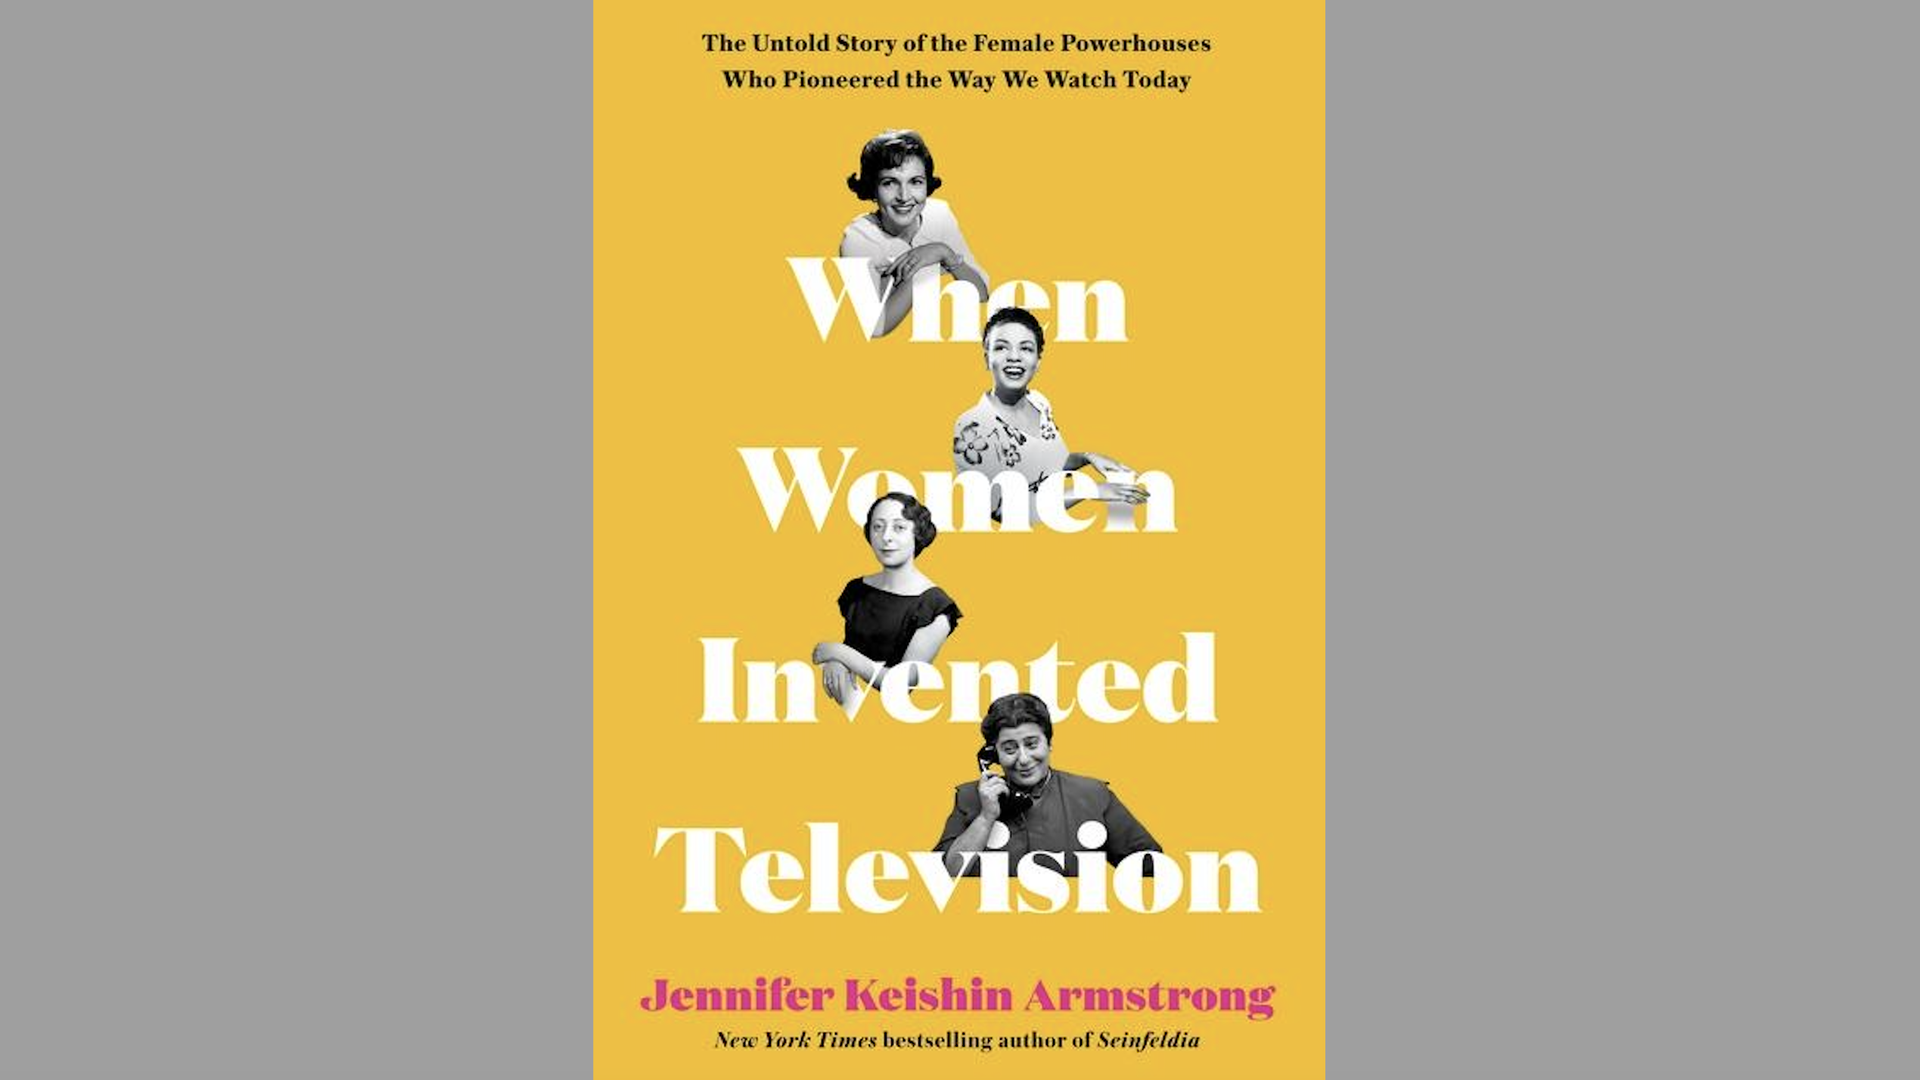 An image of the book cover for "When Women Invented Television" by Jennifer Armstrong